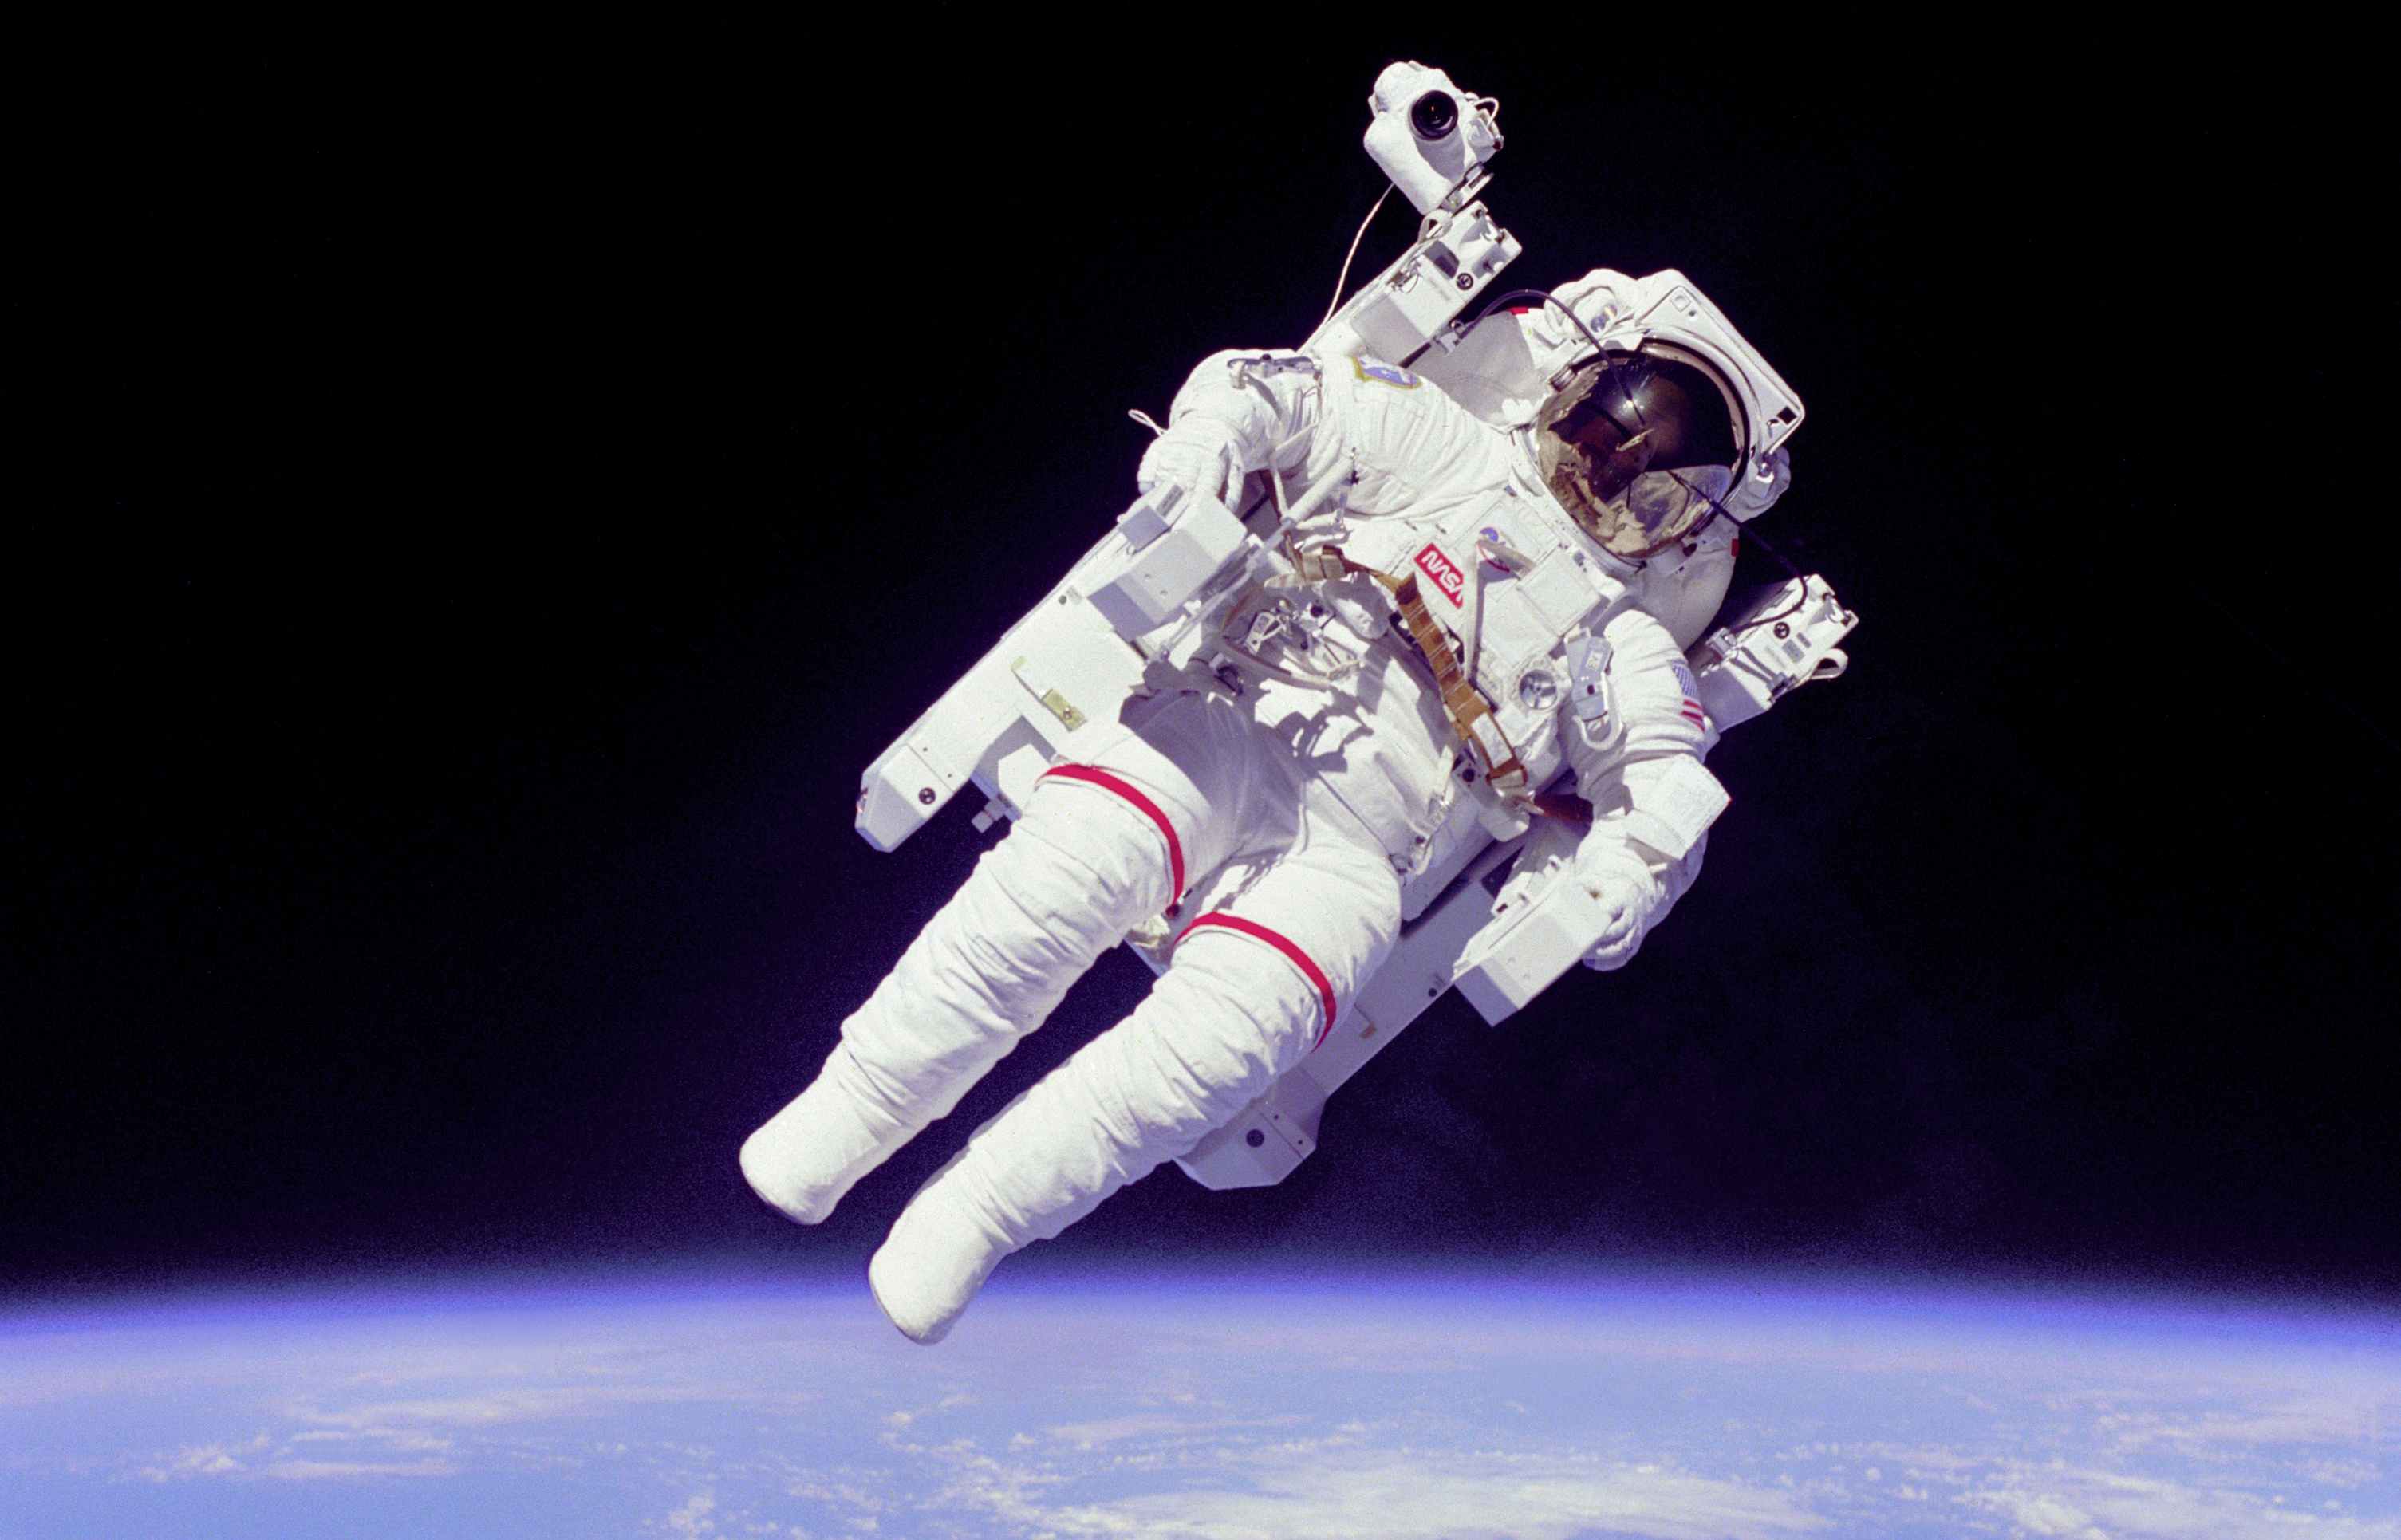 Do astronauts age faster or slower in space?